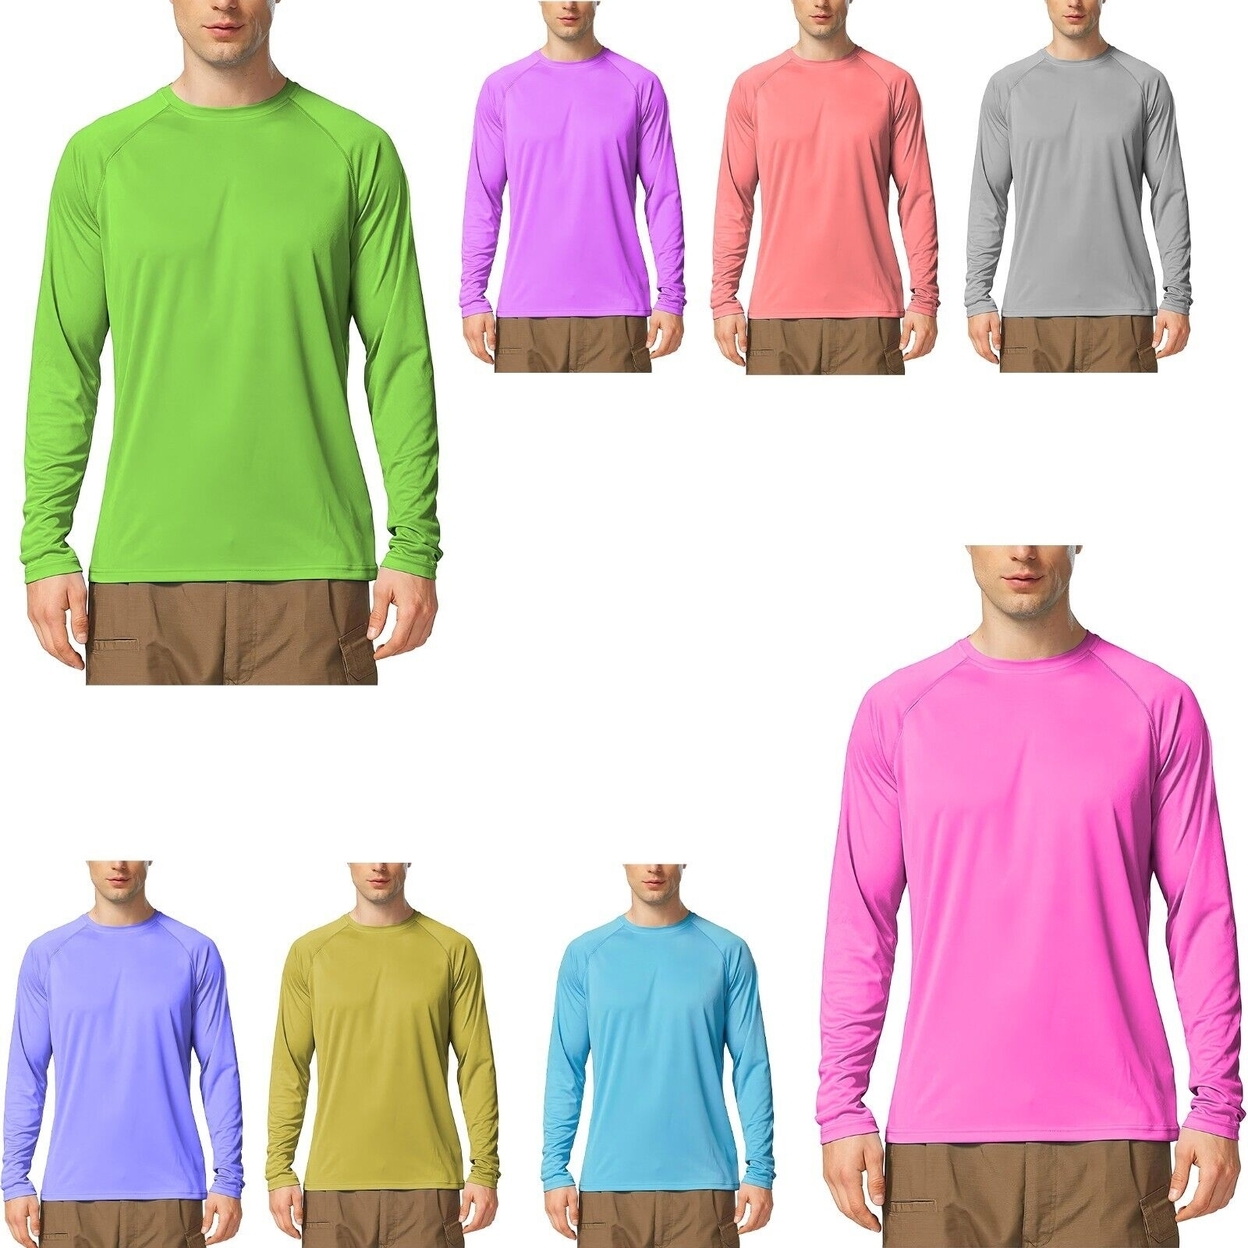 5-Pack: Men's Dri-Fit Moisture Wicking Athletic Cool Performance Slim Fit Long Sleeve T-Shirts - Large